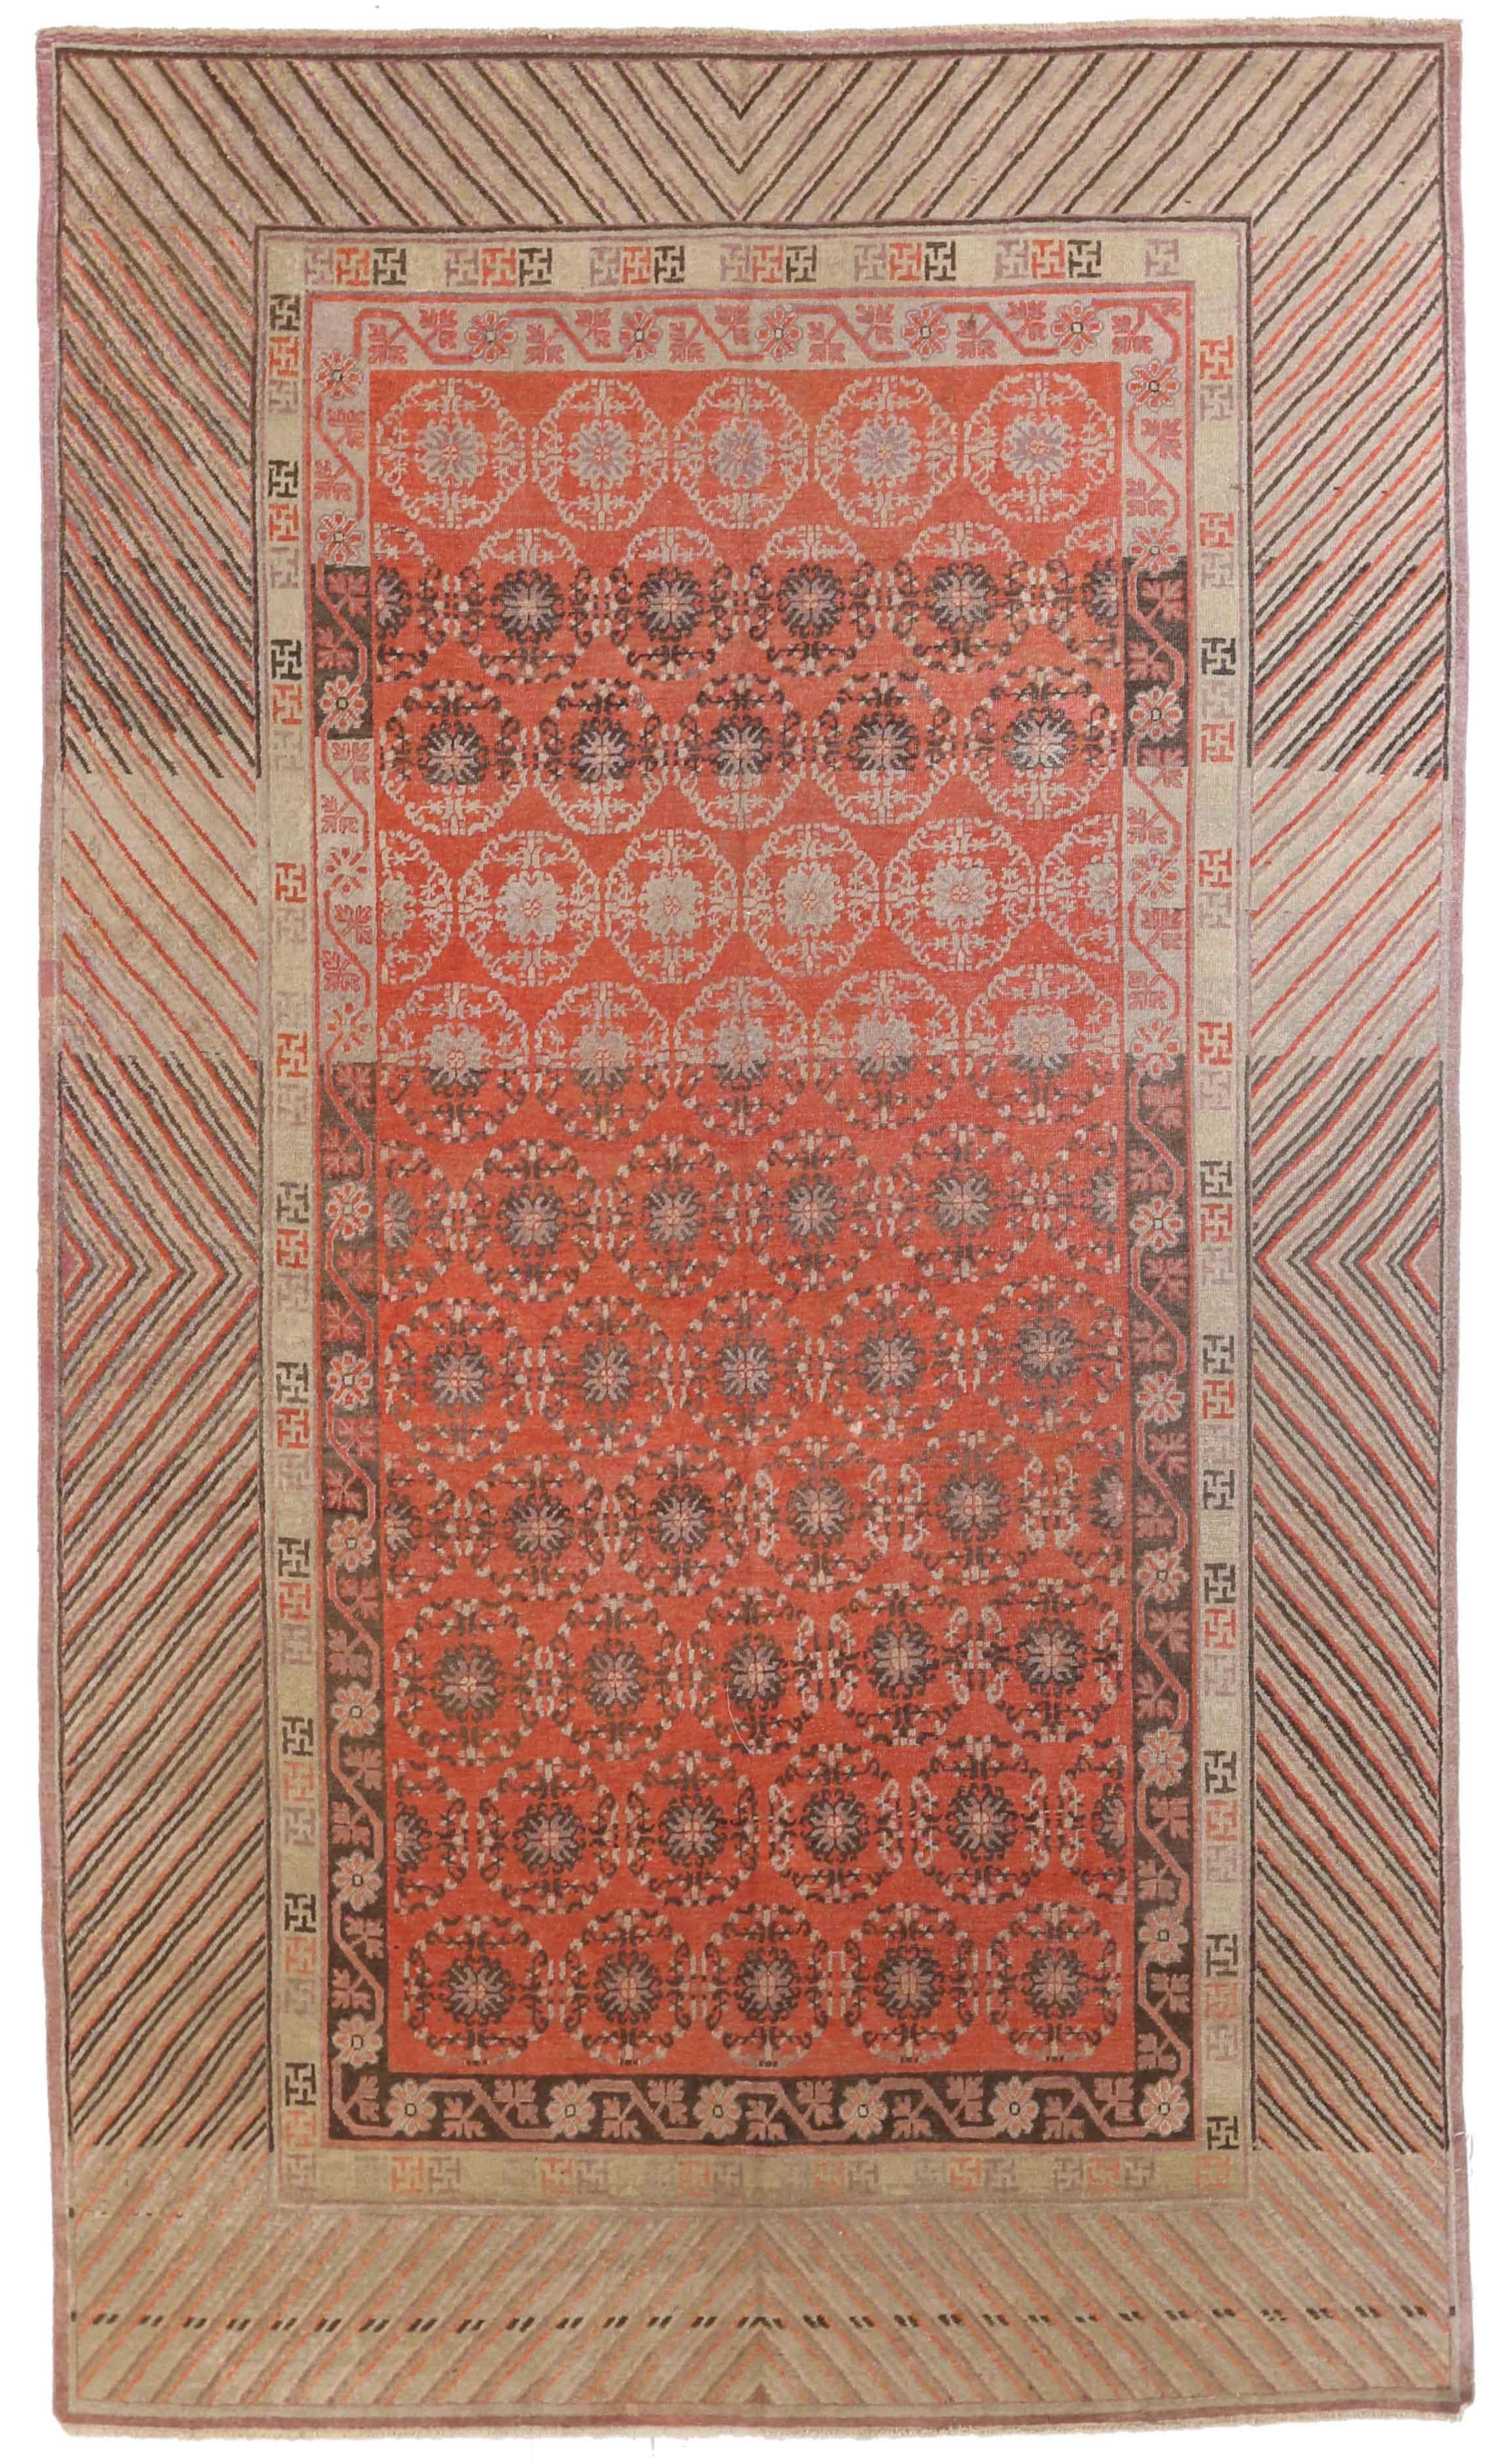 Antique Central Asian rug is woven by hand using high-quality wool and the best natural dyes in the region. It features a lively combination of geometric and nature-inspired design patterns favored by Khotan weavers. This piece has a vibrant color